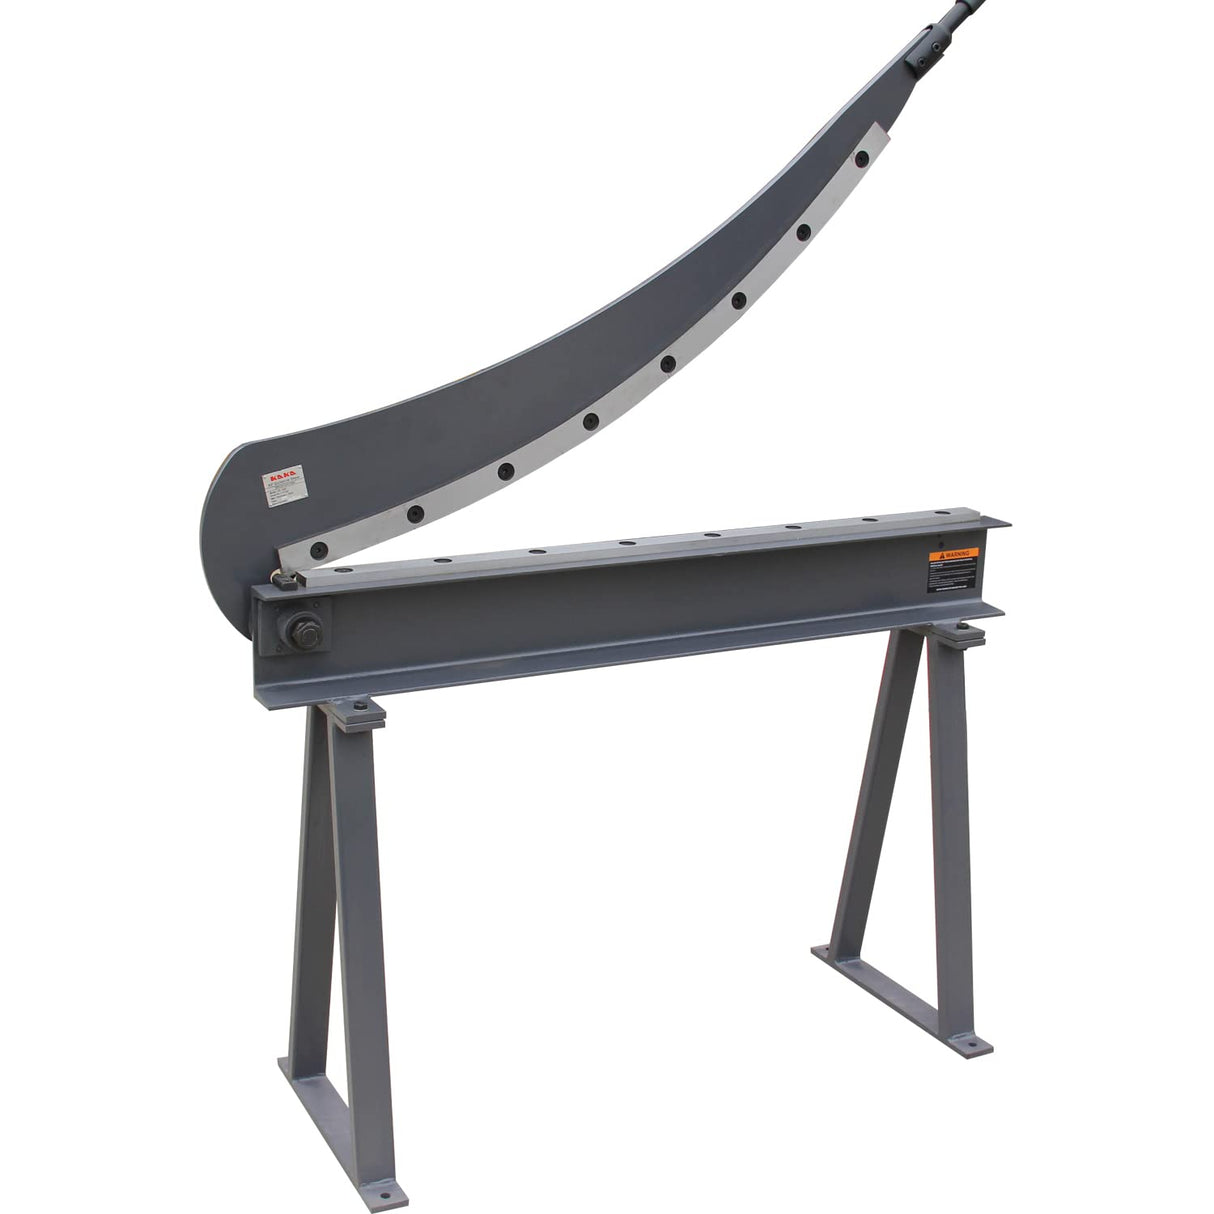 KANG industrial HS-40 Guillotine Metal Shear, 1000mm Bed Width, 16 Gauge Metal Shear with a Stand for Sheet Metal Fabrication Plate Cutting Cutter